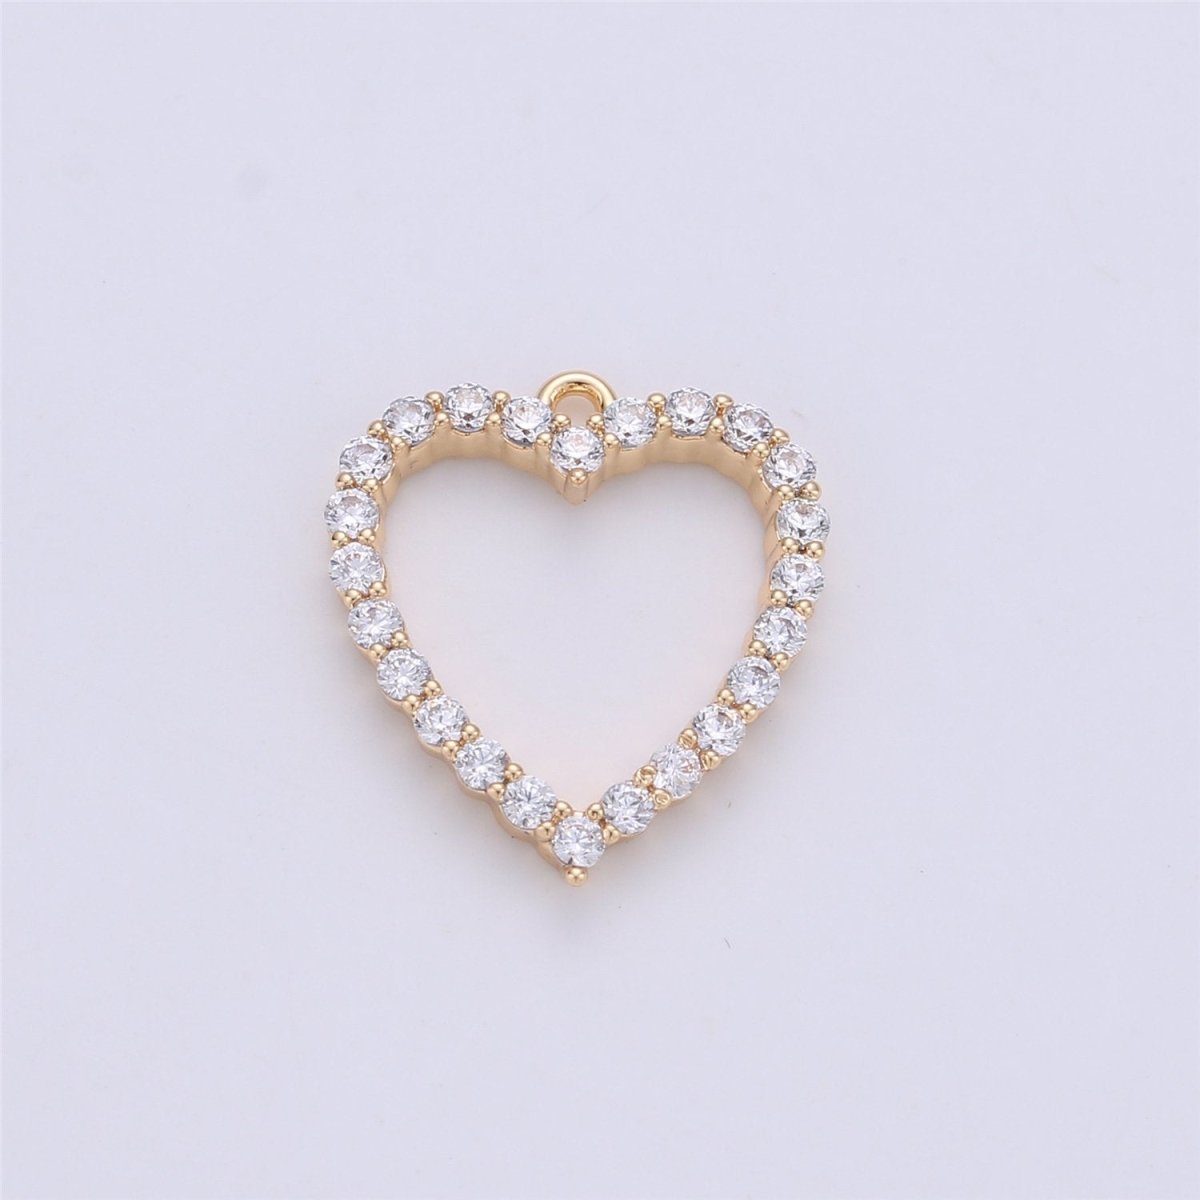 Cubic Heart Charm 15x13mm, 18 gold Filled Charm Cubic zirconia, Micro Pave heart charm, Dainty heart pendant for Earring Necklace Bracelet K-141 - DLUXCA